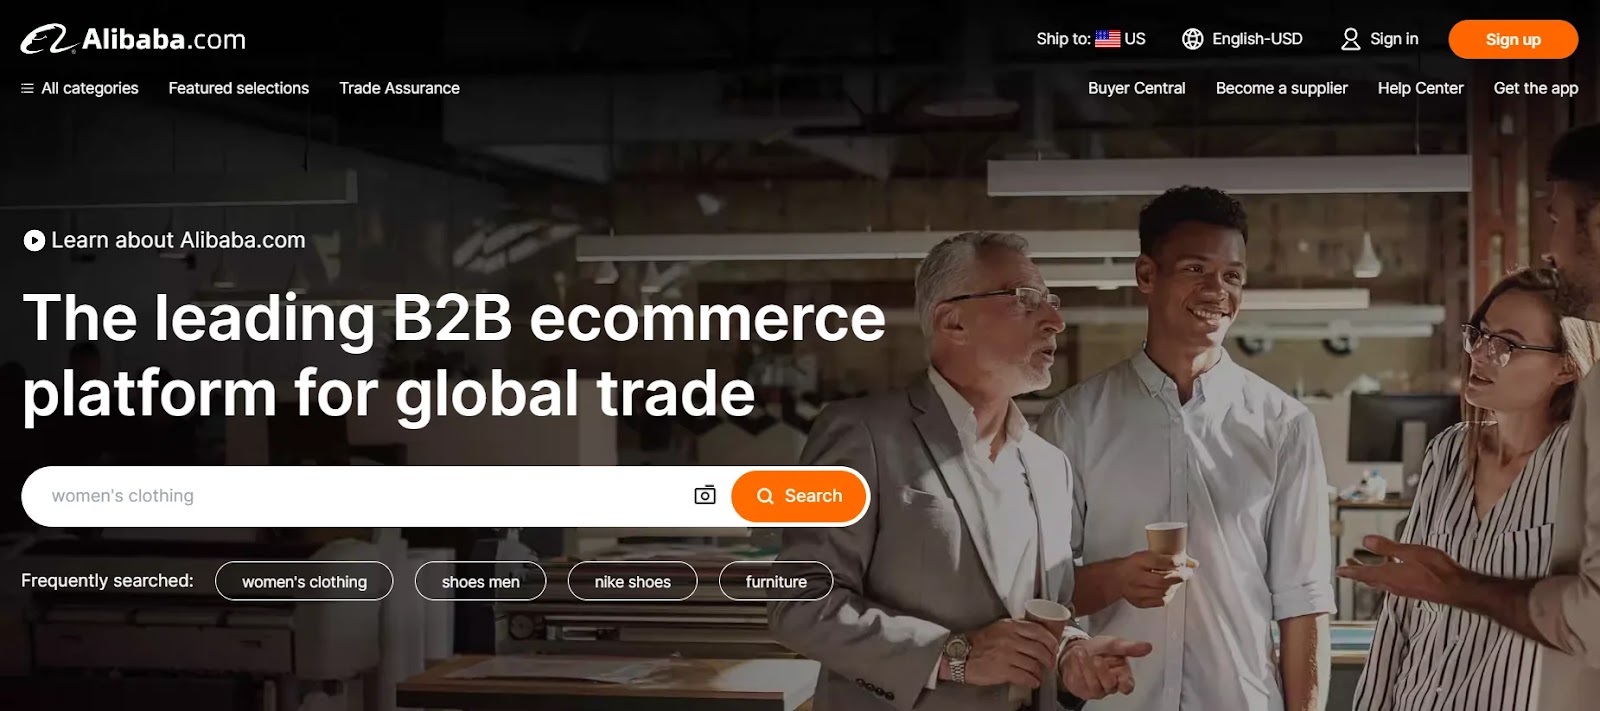 Alibaba.com landing page section